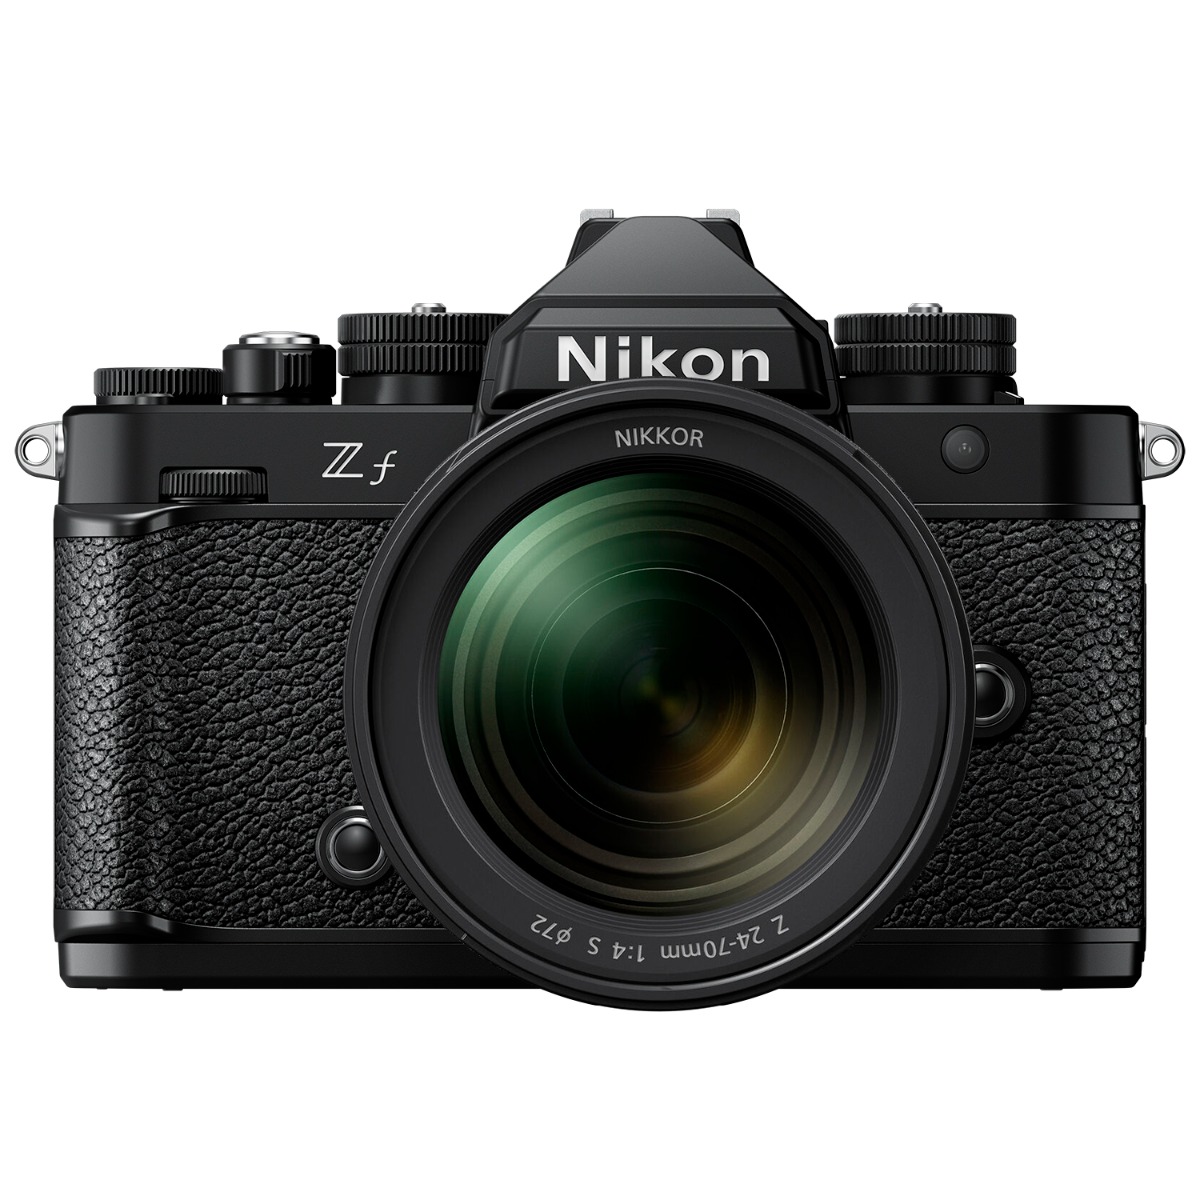 Nikon Z6 II Mirrorless Camera with 24-70mm f/2.8 Lens and Accessories Kit